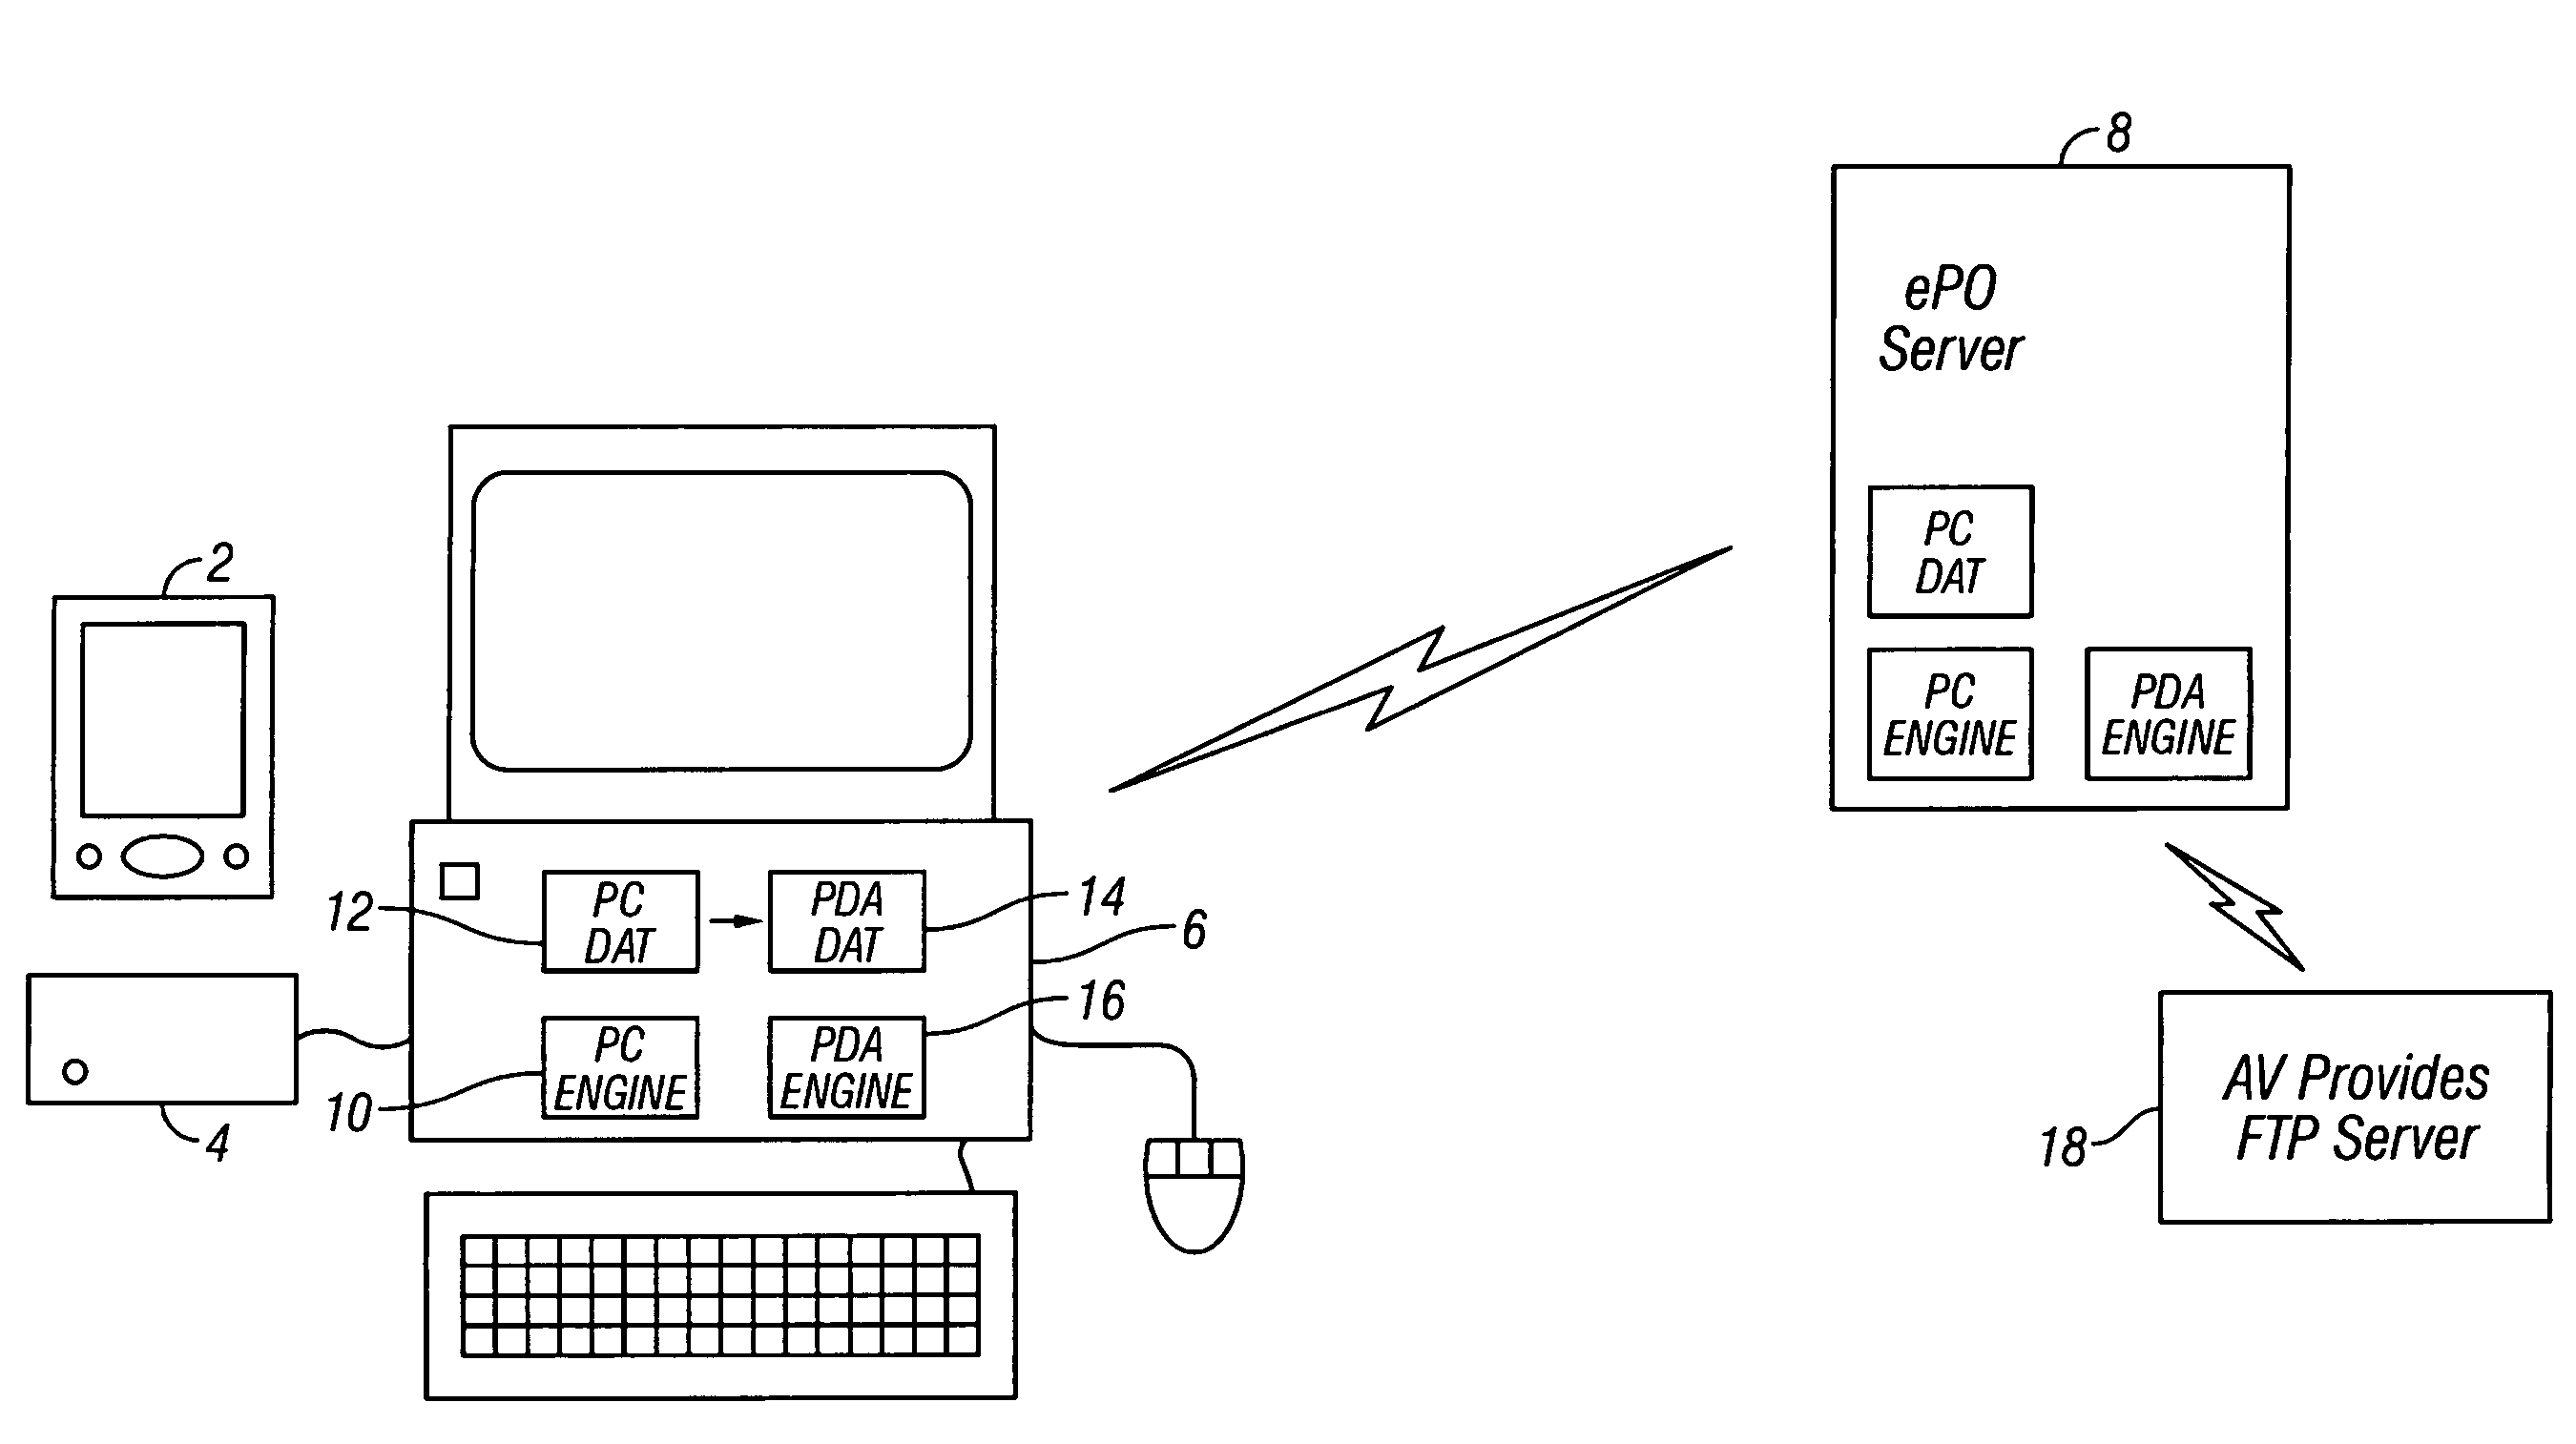 Generating malware definition data for mobile computing devices